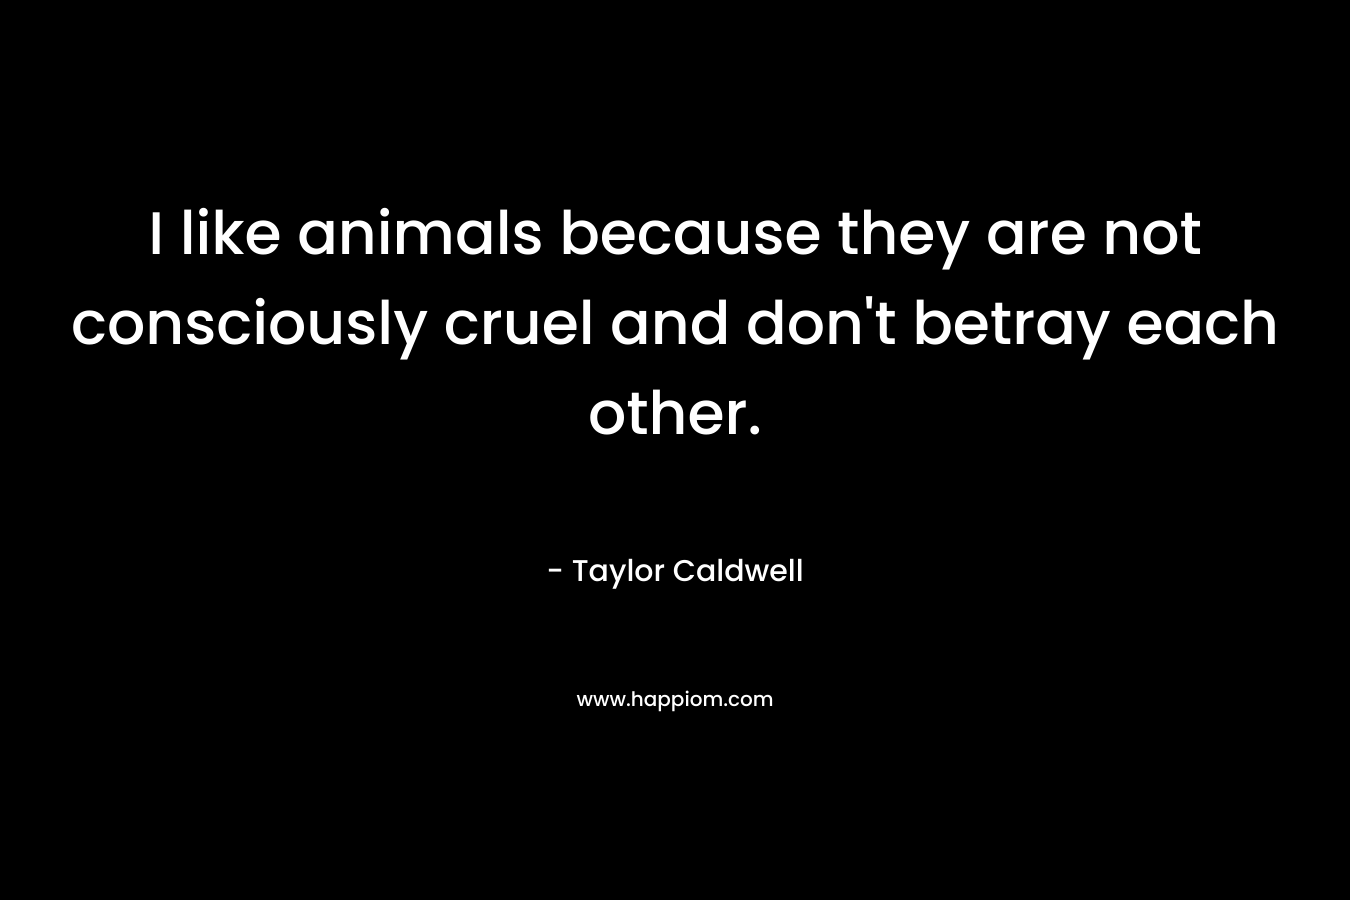 I like animals because they are not consciously cruel and don’t betray each other. – Taylor Caldwell